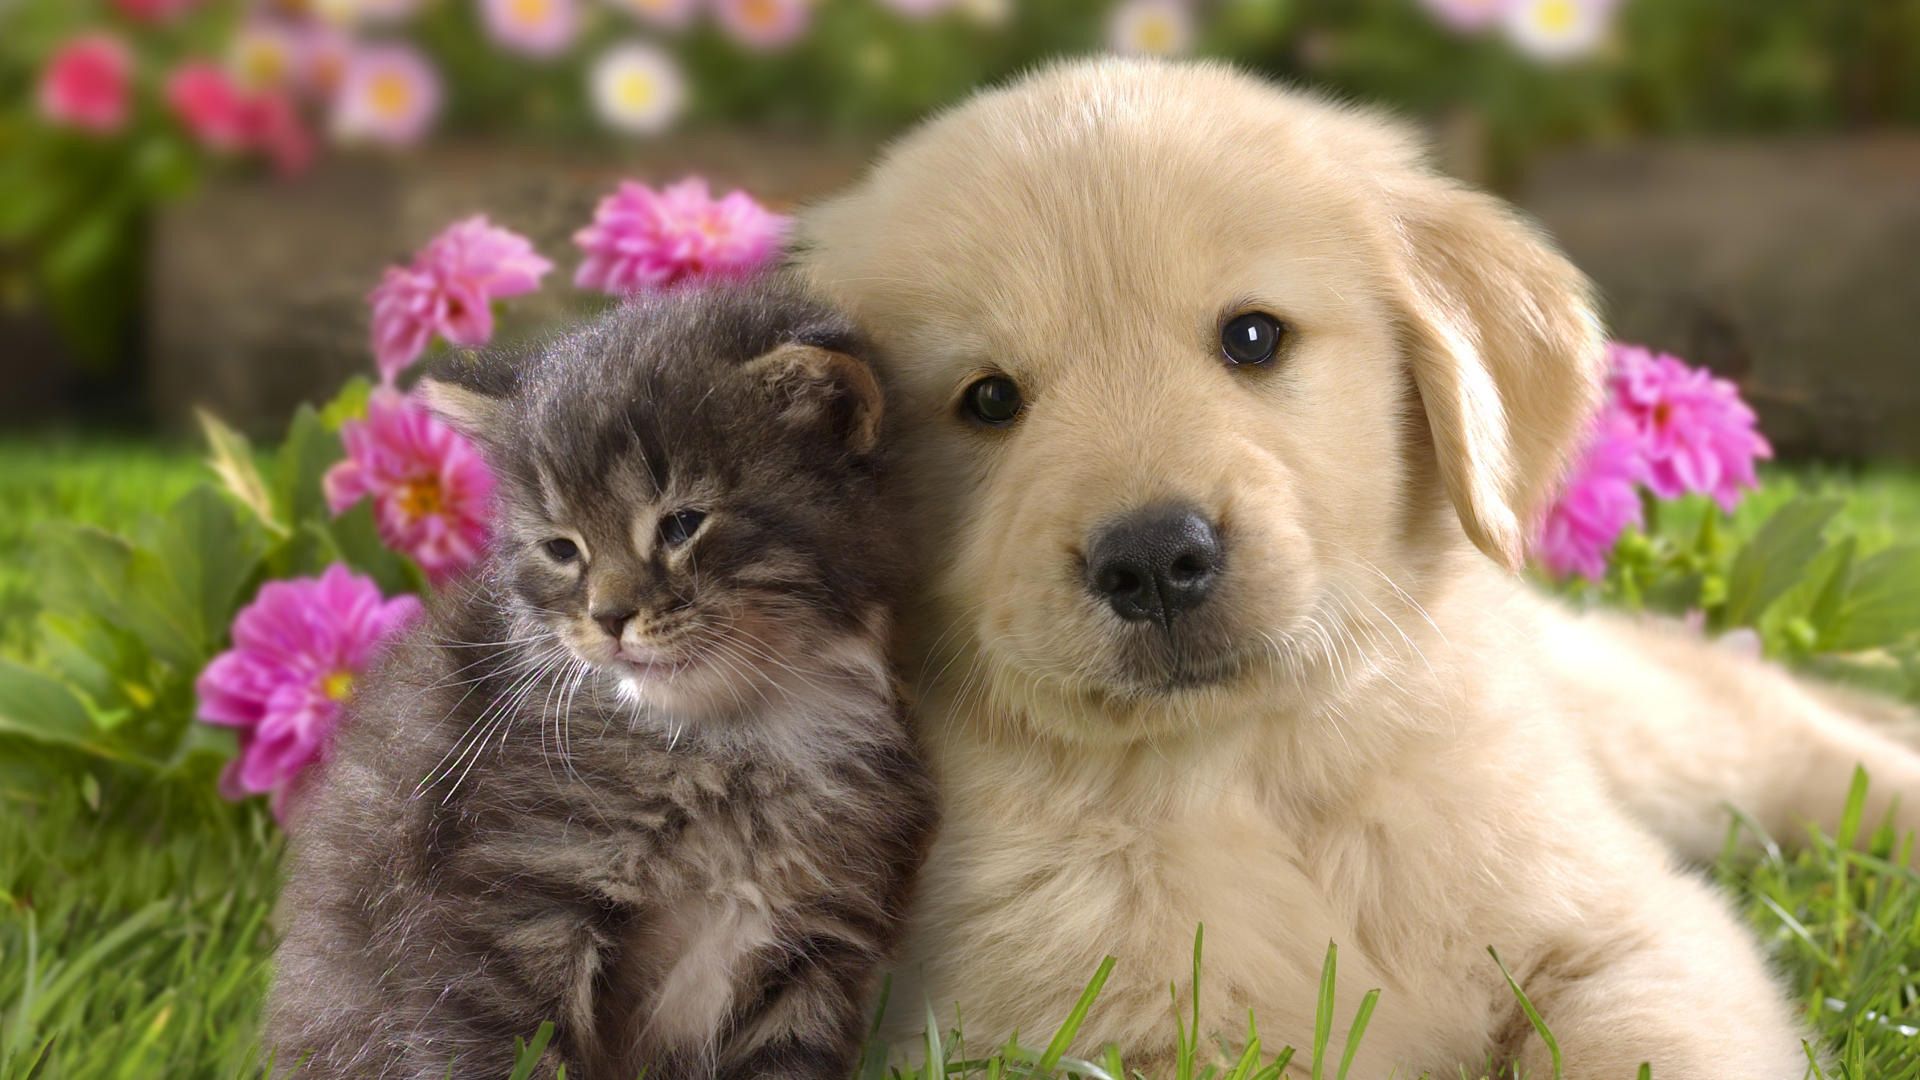 Cute Dog And Cat 1920x1080